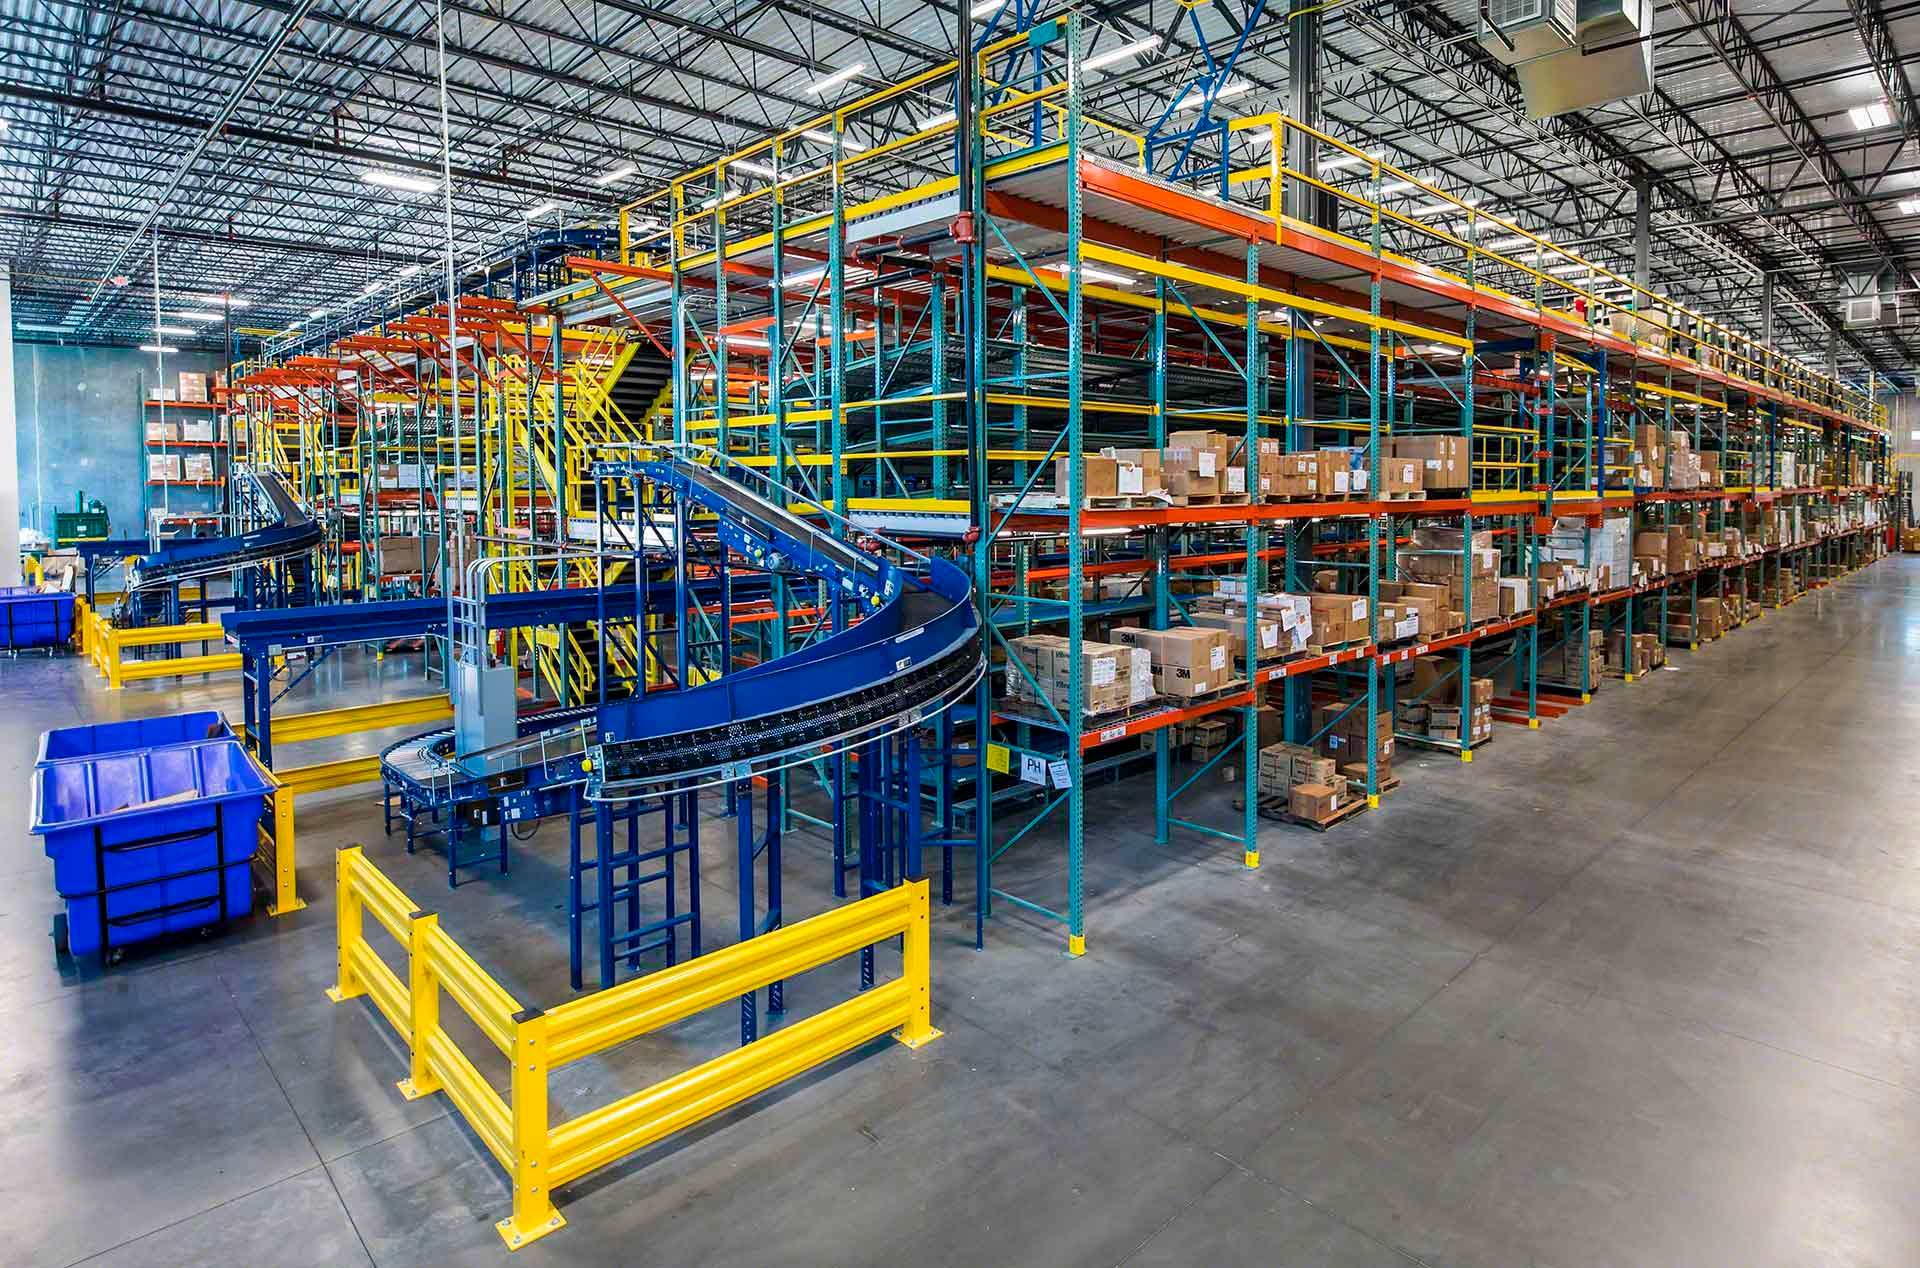 Chaotic storage is a location allocation system that maximises warehouse capacity